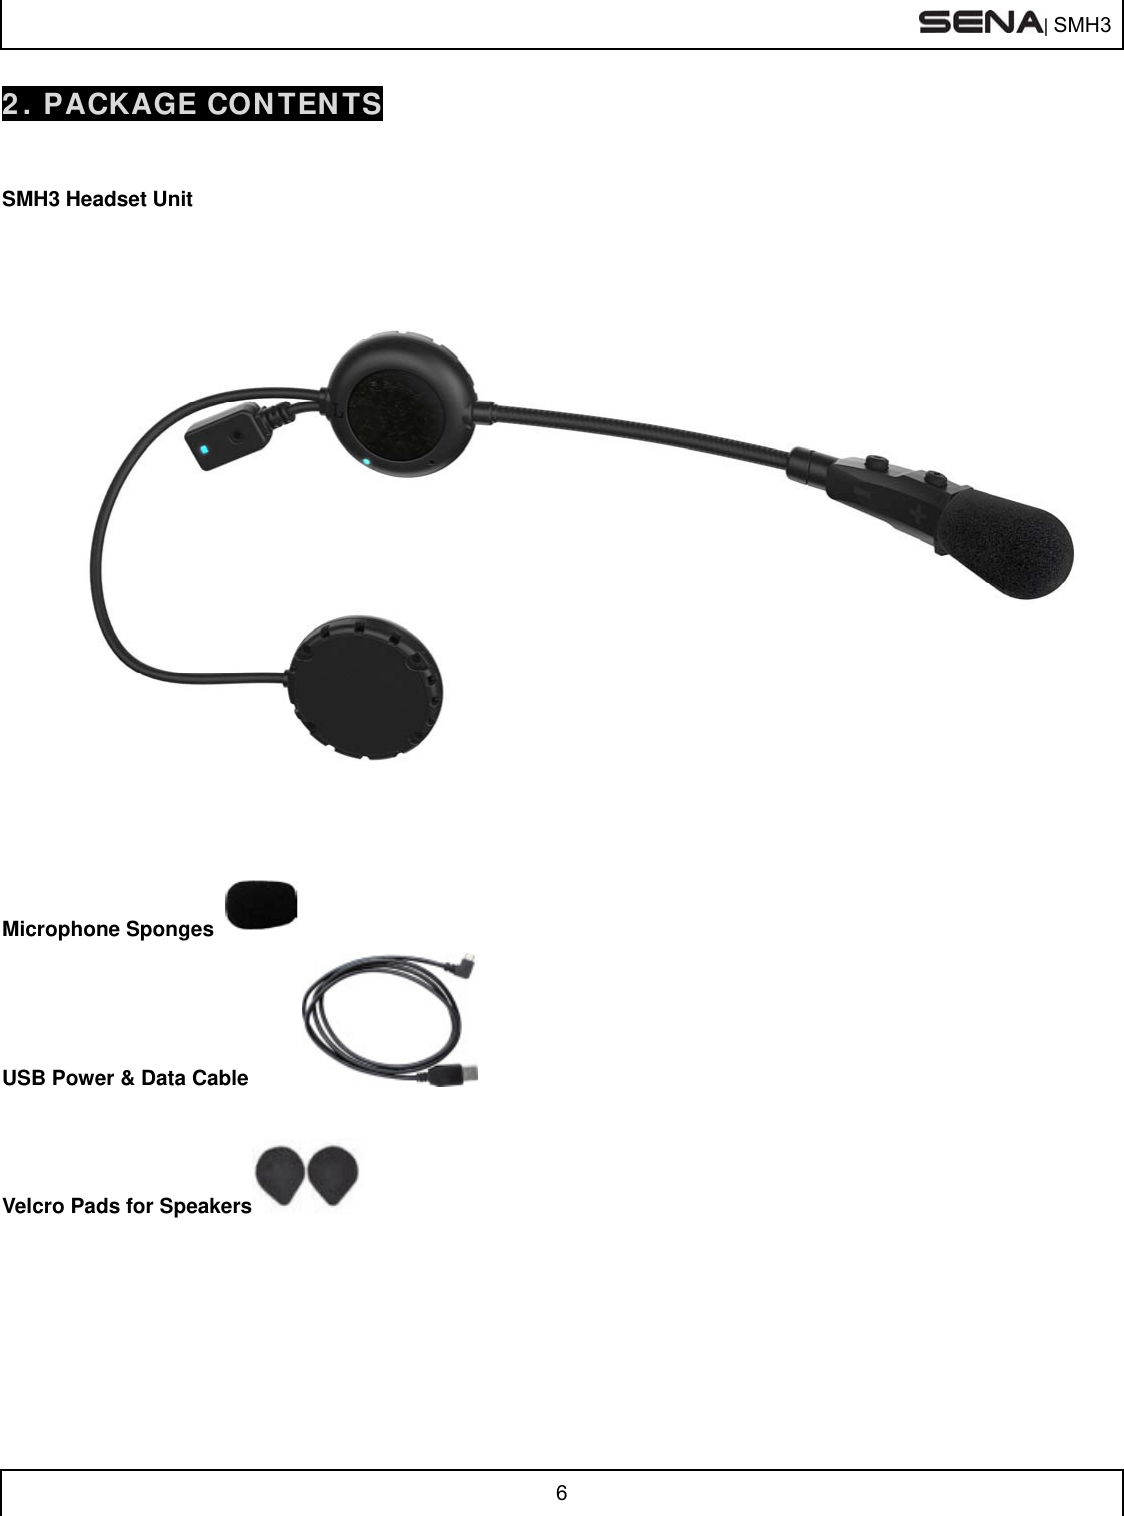  | SMH3  6  2. PACKAGE CONTENTS   SMH3 Headset Unit        Microphone Sponges   USB Power &amp; Data Cable    Velcro Pads for Speakers        